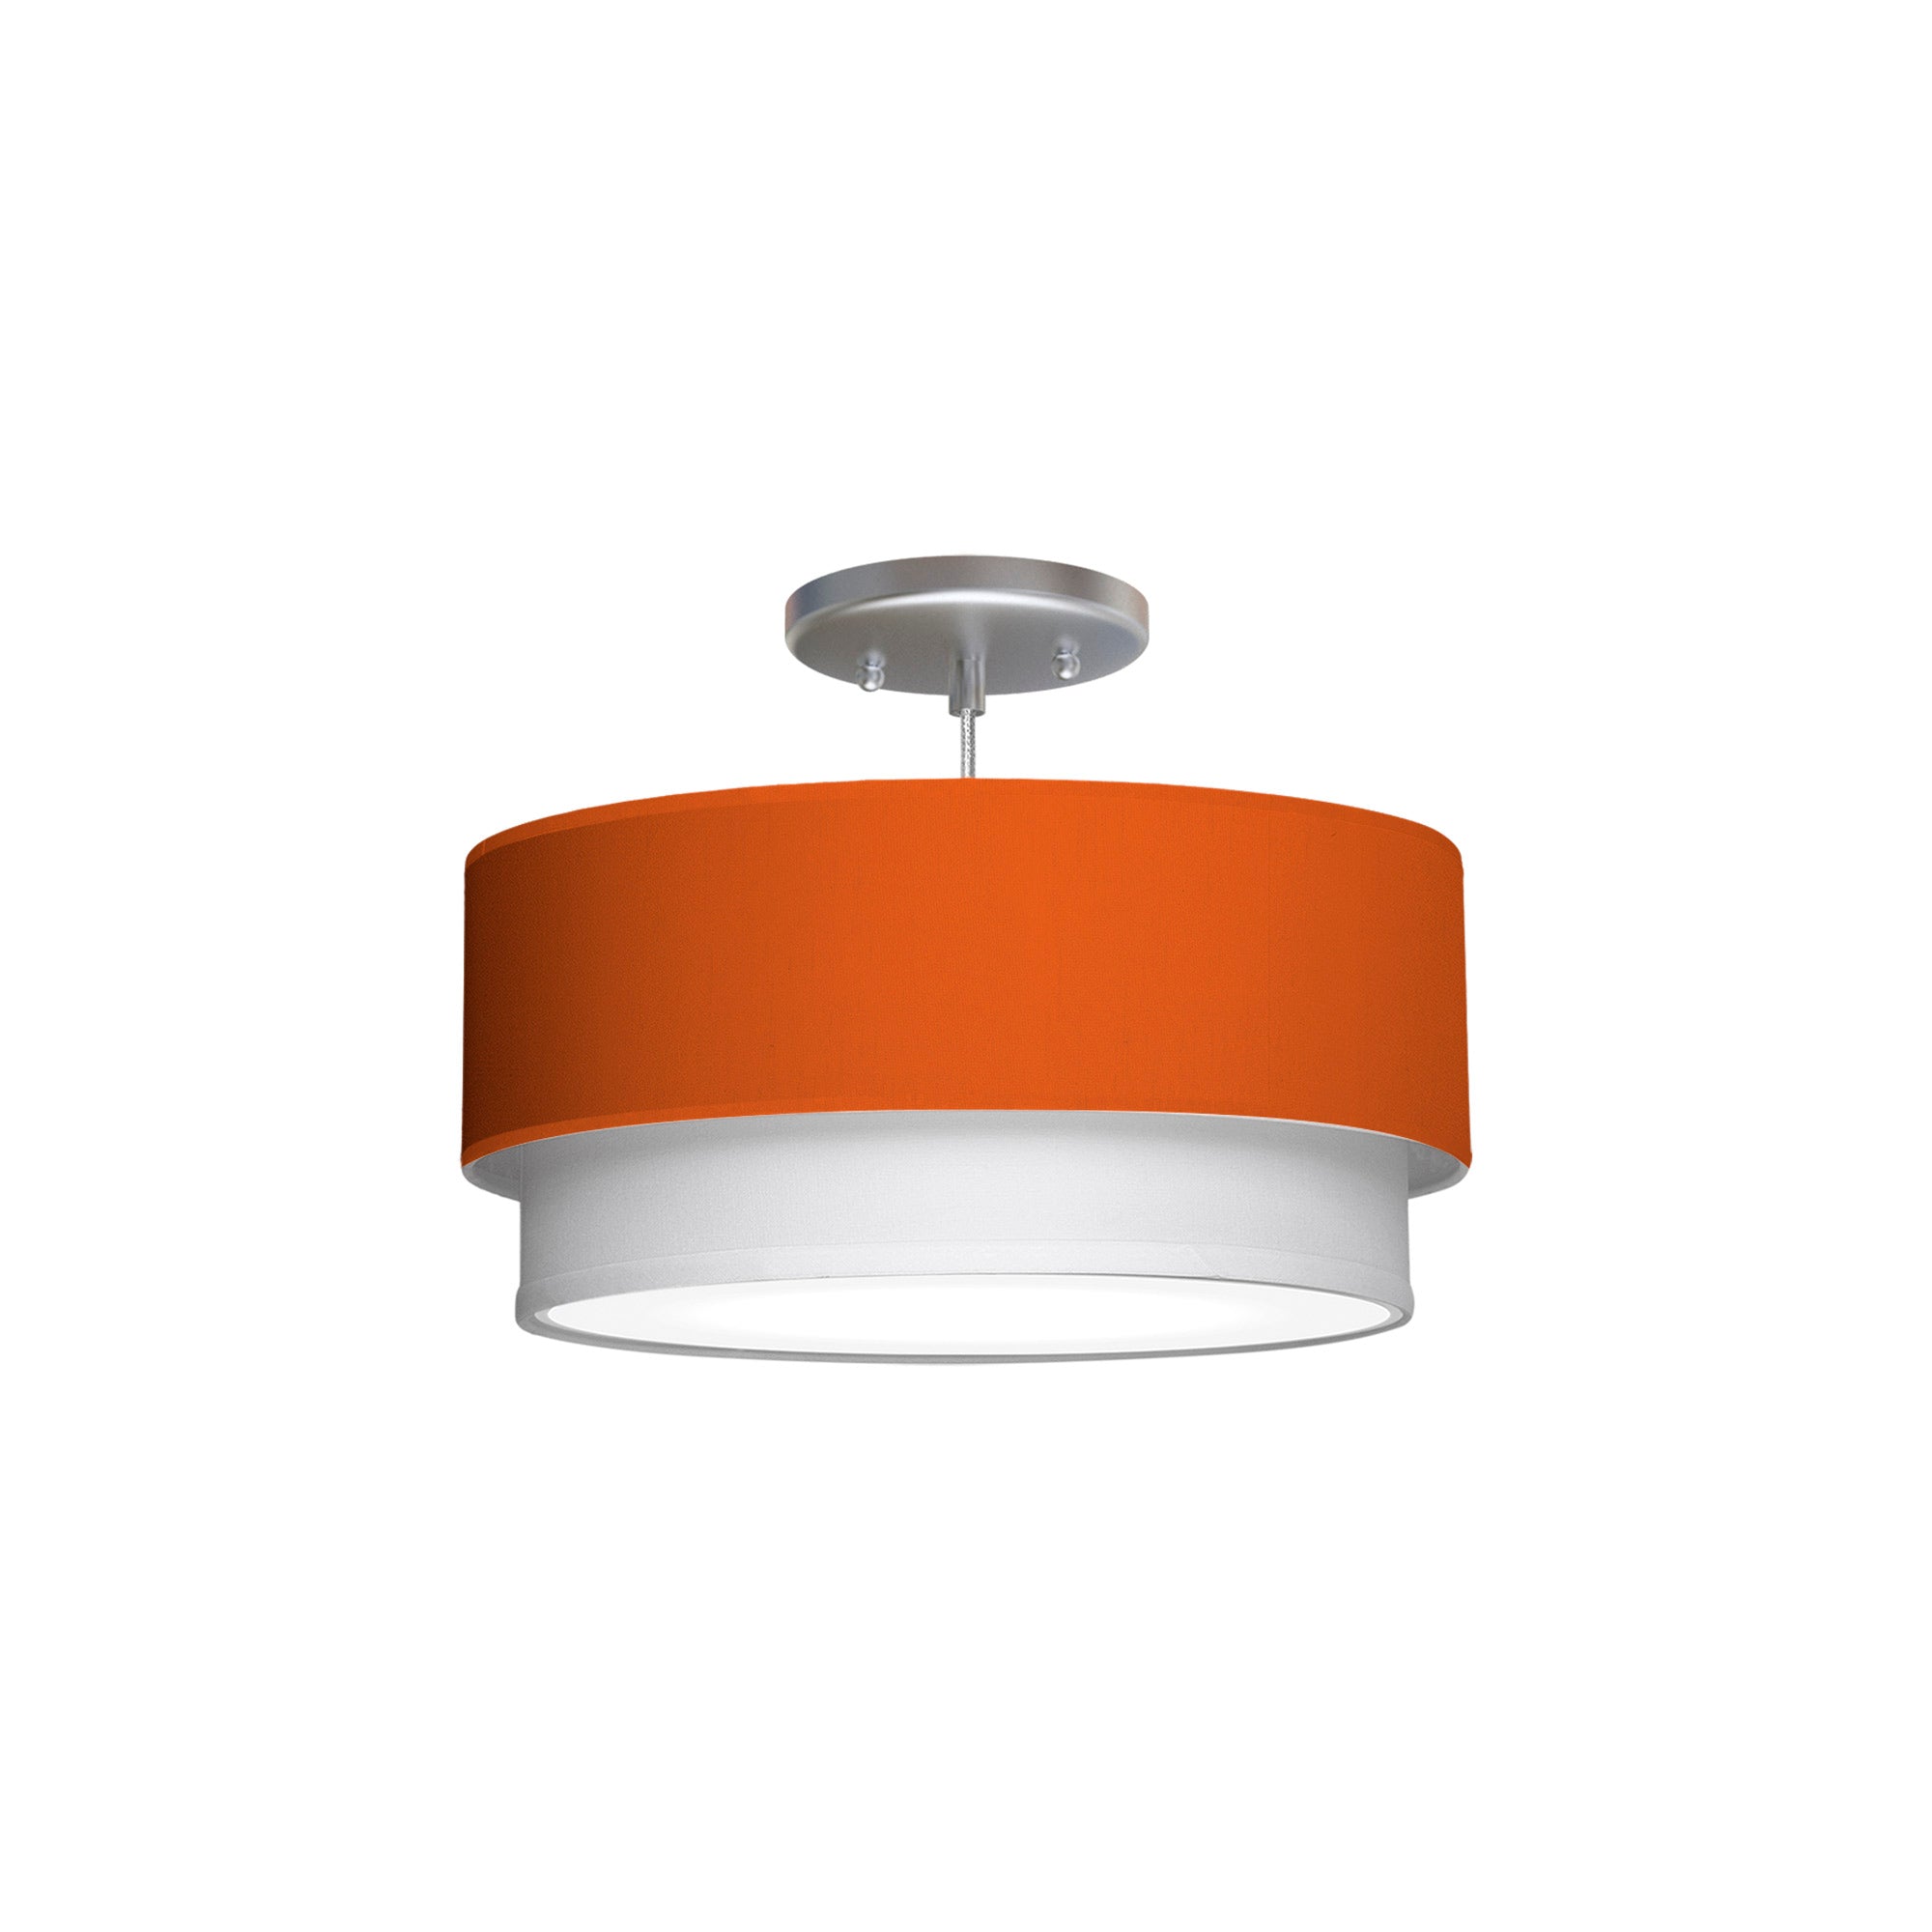 The Lenny Hanging Lamp from Seascape Fixtures with a silk shade in orange color.